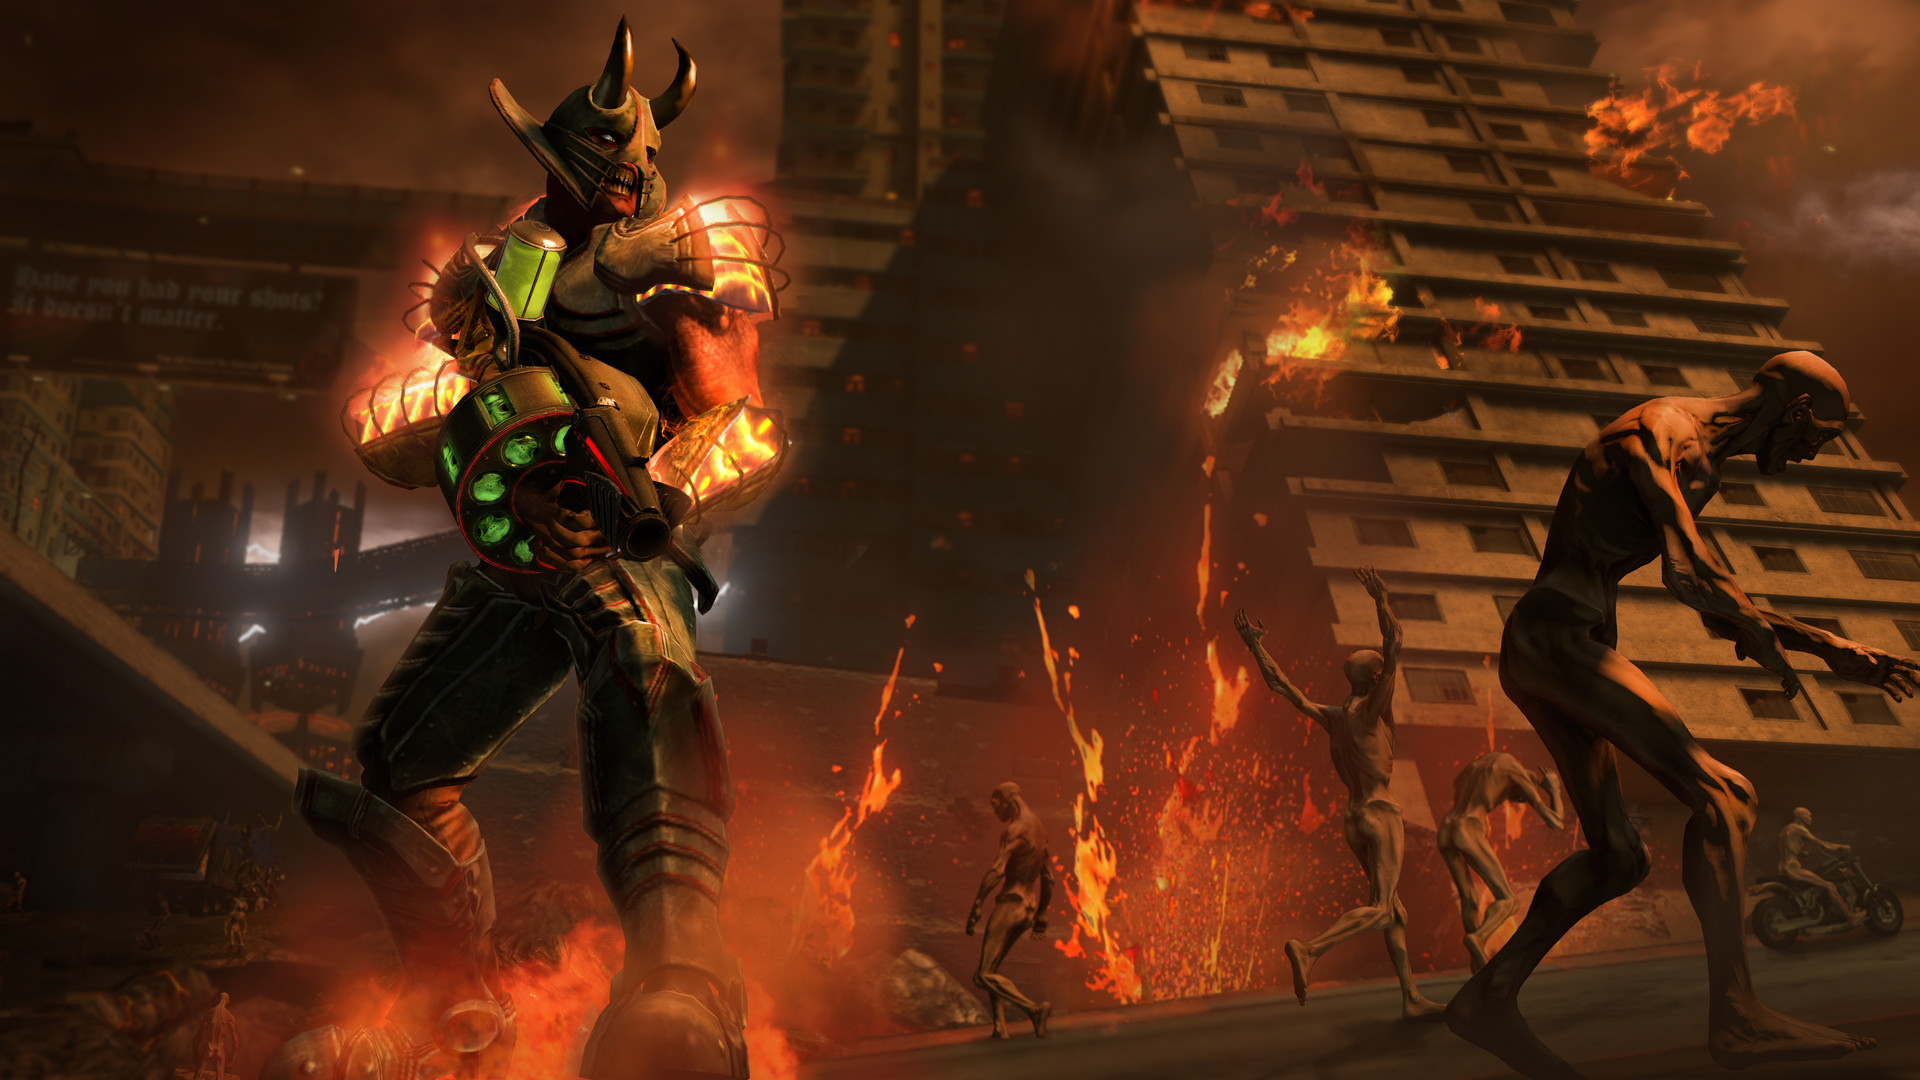 Save 50% on Saints Row: Gat out of Hell - Devil's Workshop pack on Steam